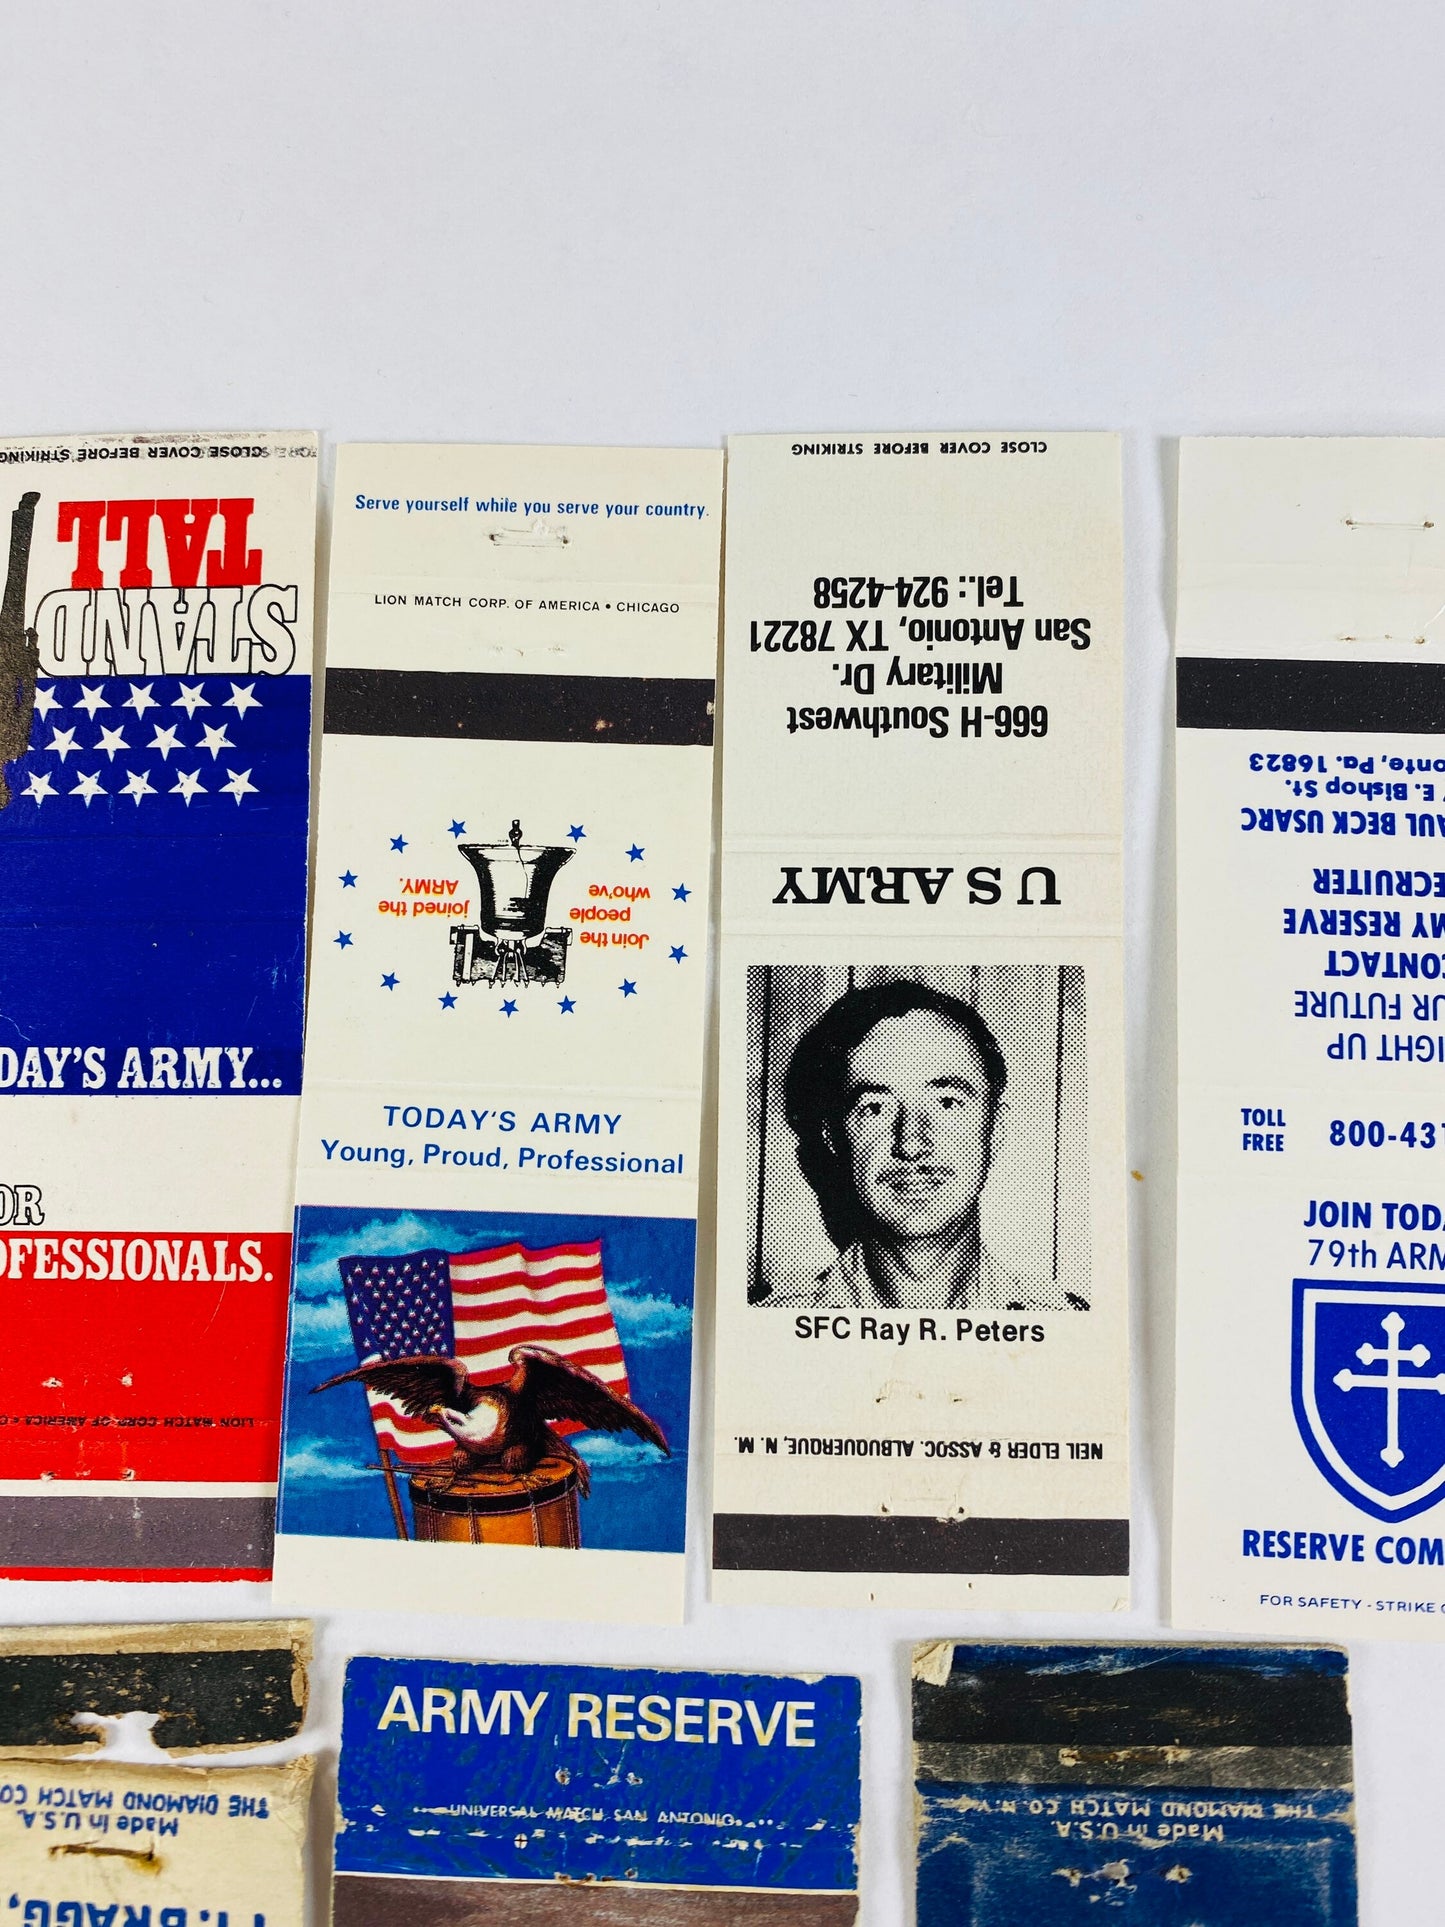 Vintage United States Army Matchbook cover lot advertising San Luis Obispo ARCOM Texas Ft Bragg Pueblo Colorado. 13 covers for matches